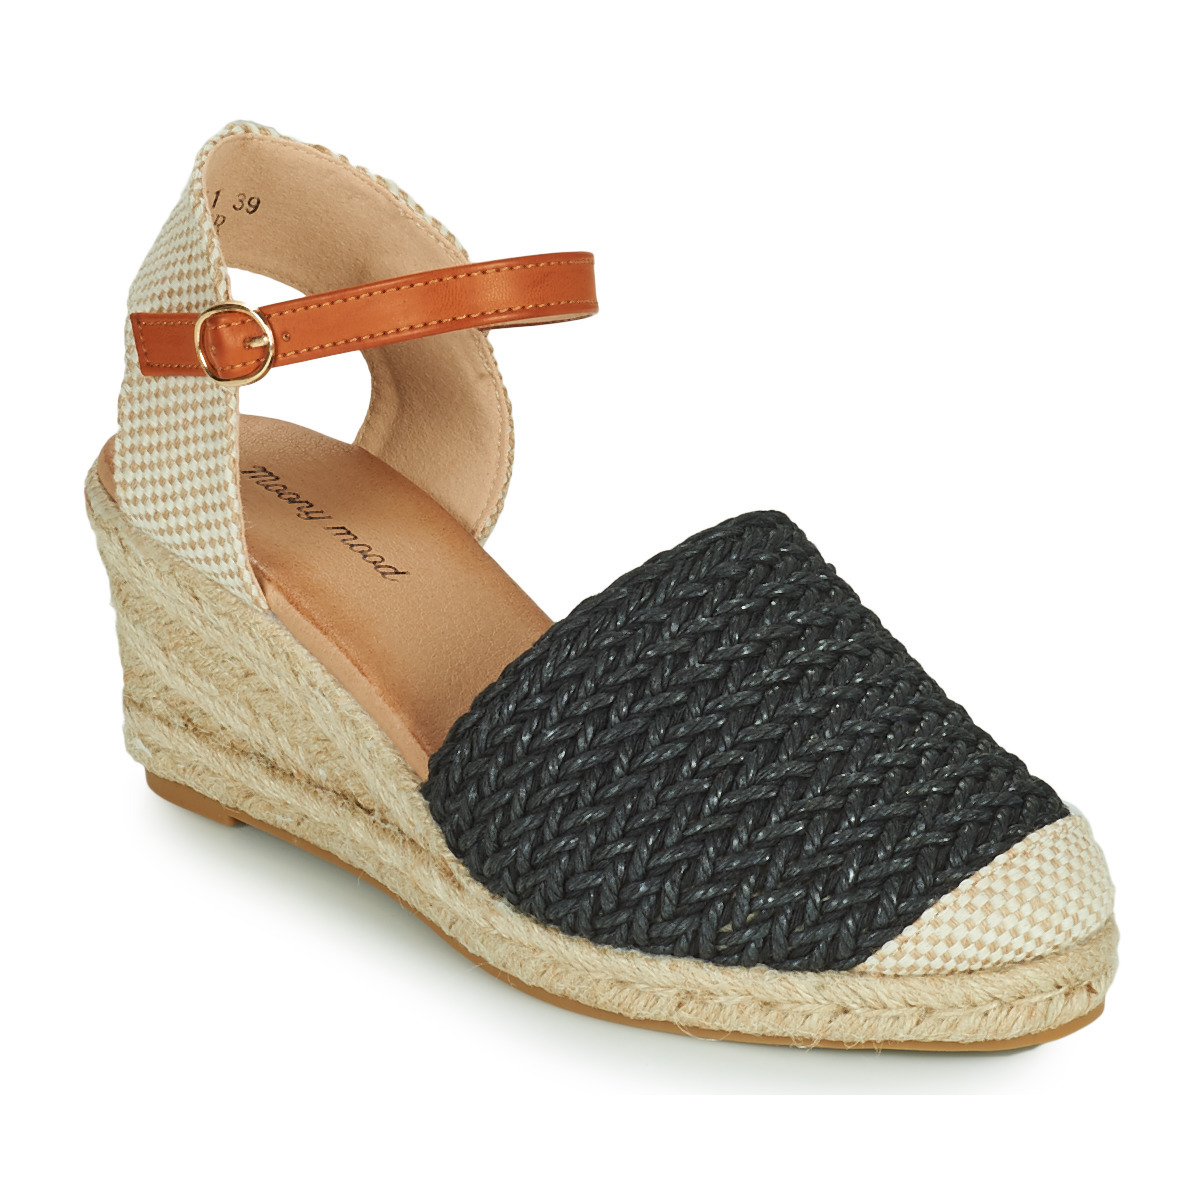 Spartoo - Lady Sandals in Black from Moony Mood GOOFASH